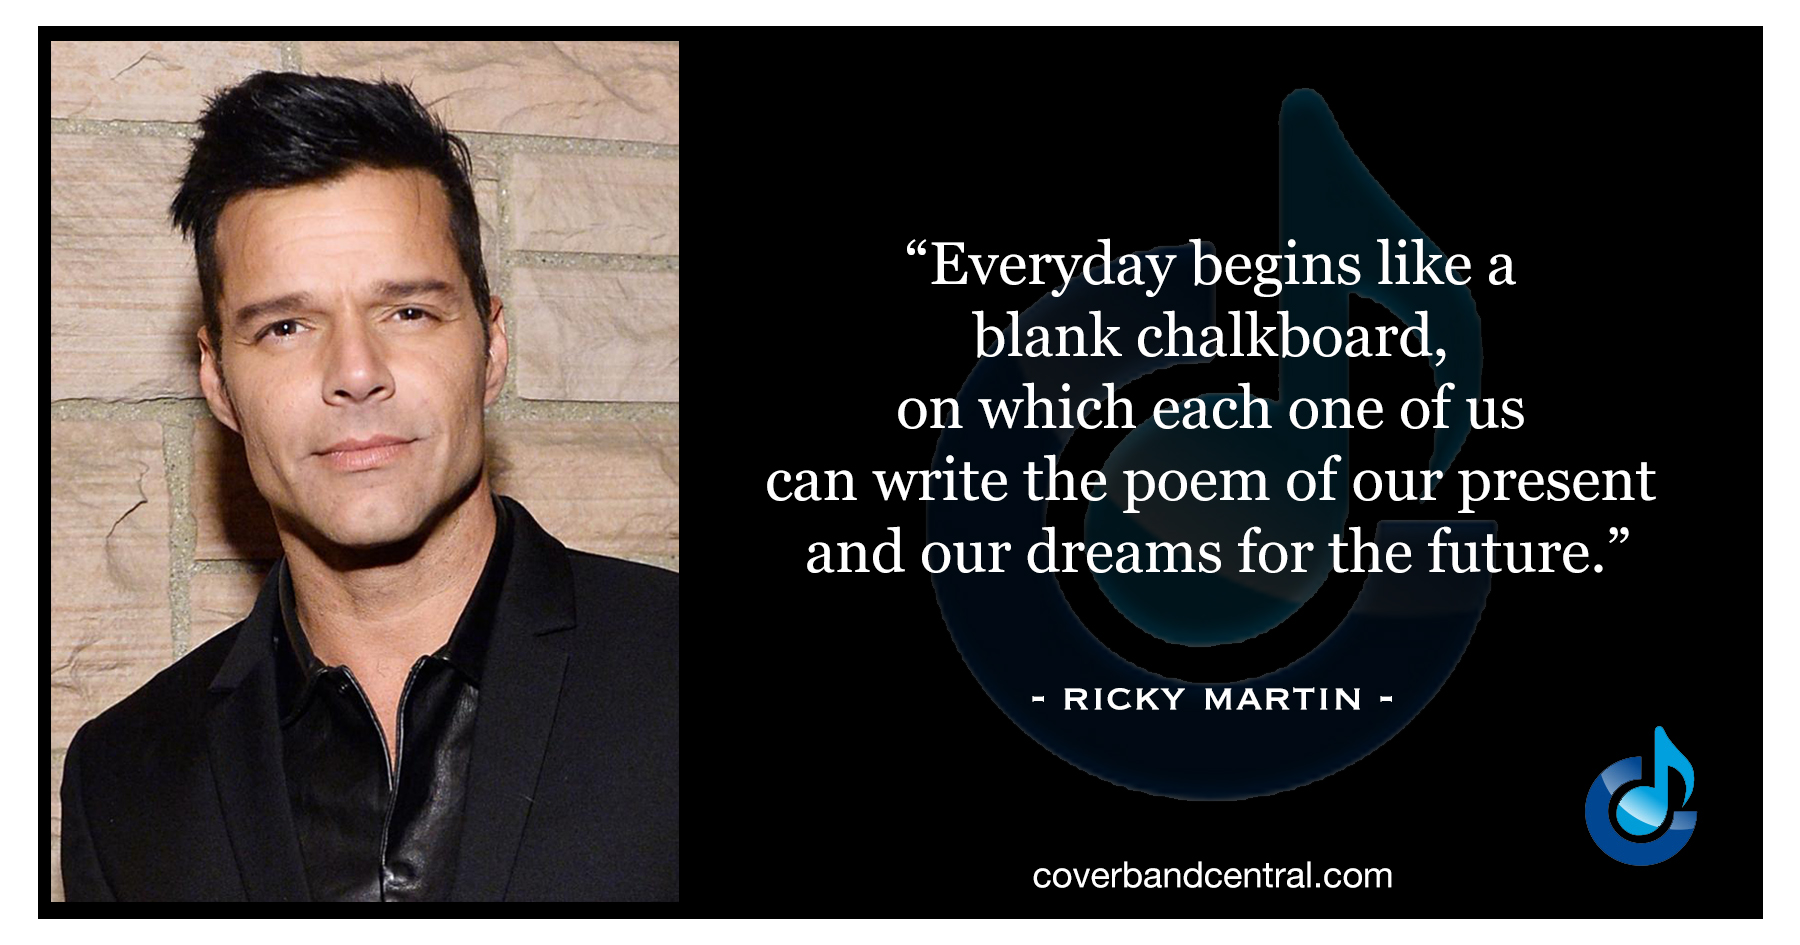 Ricky Martin quote